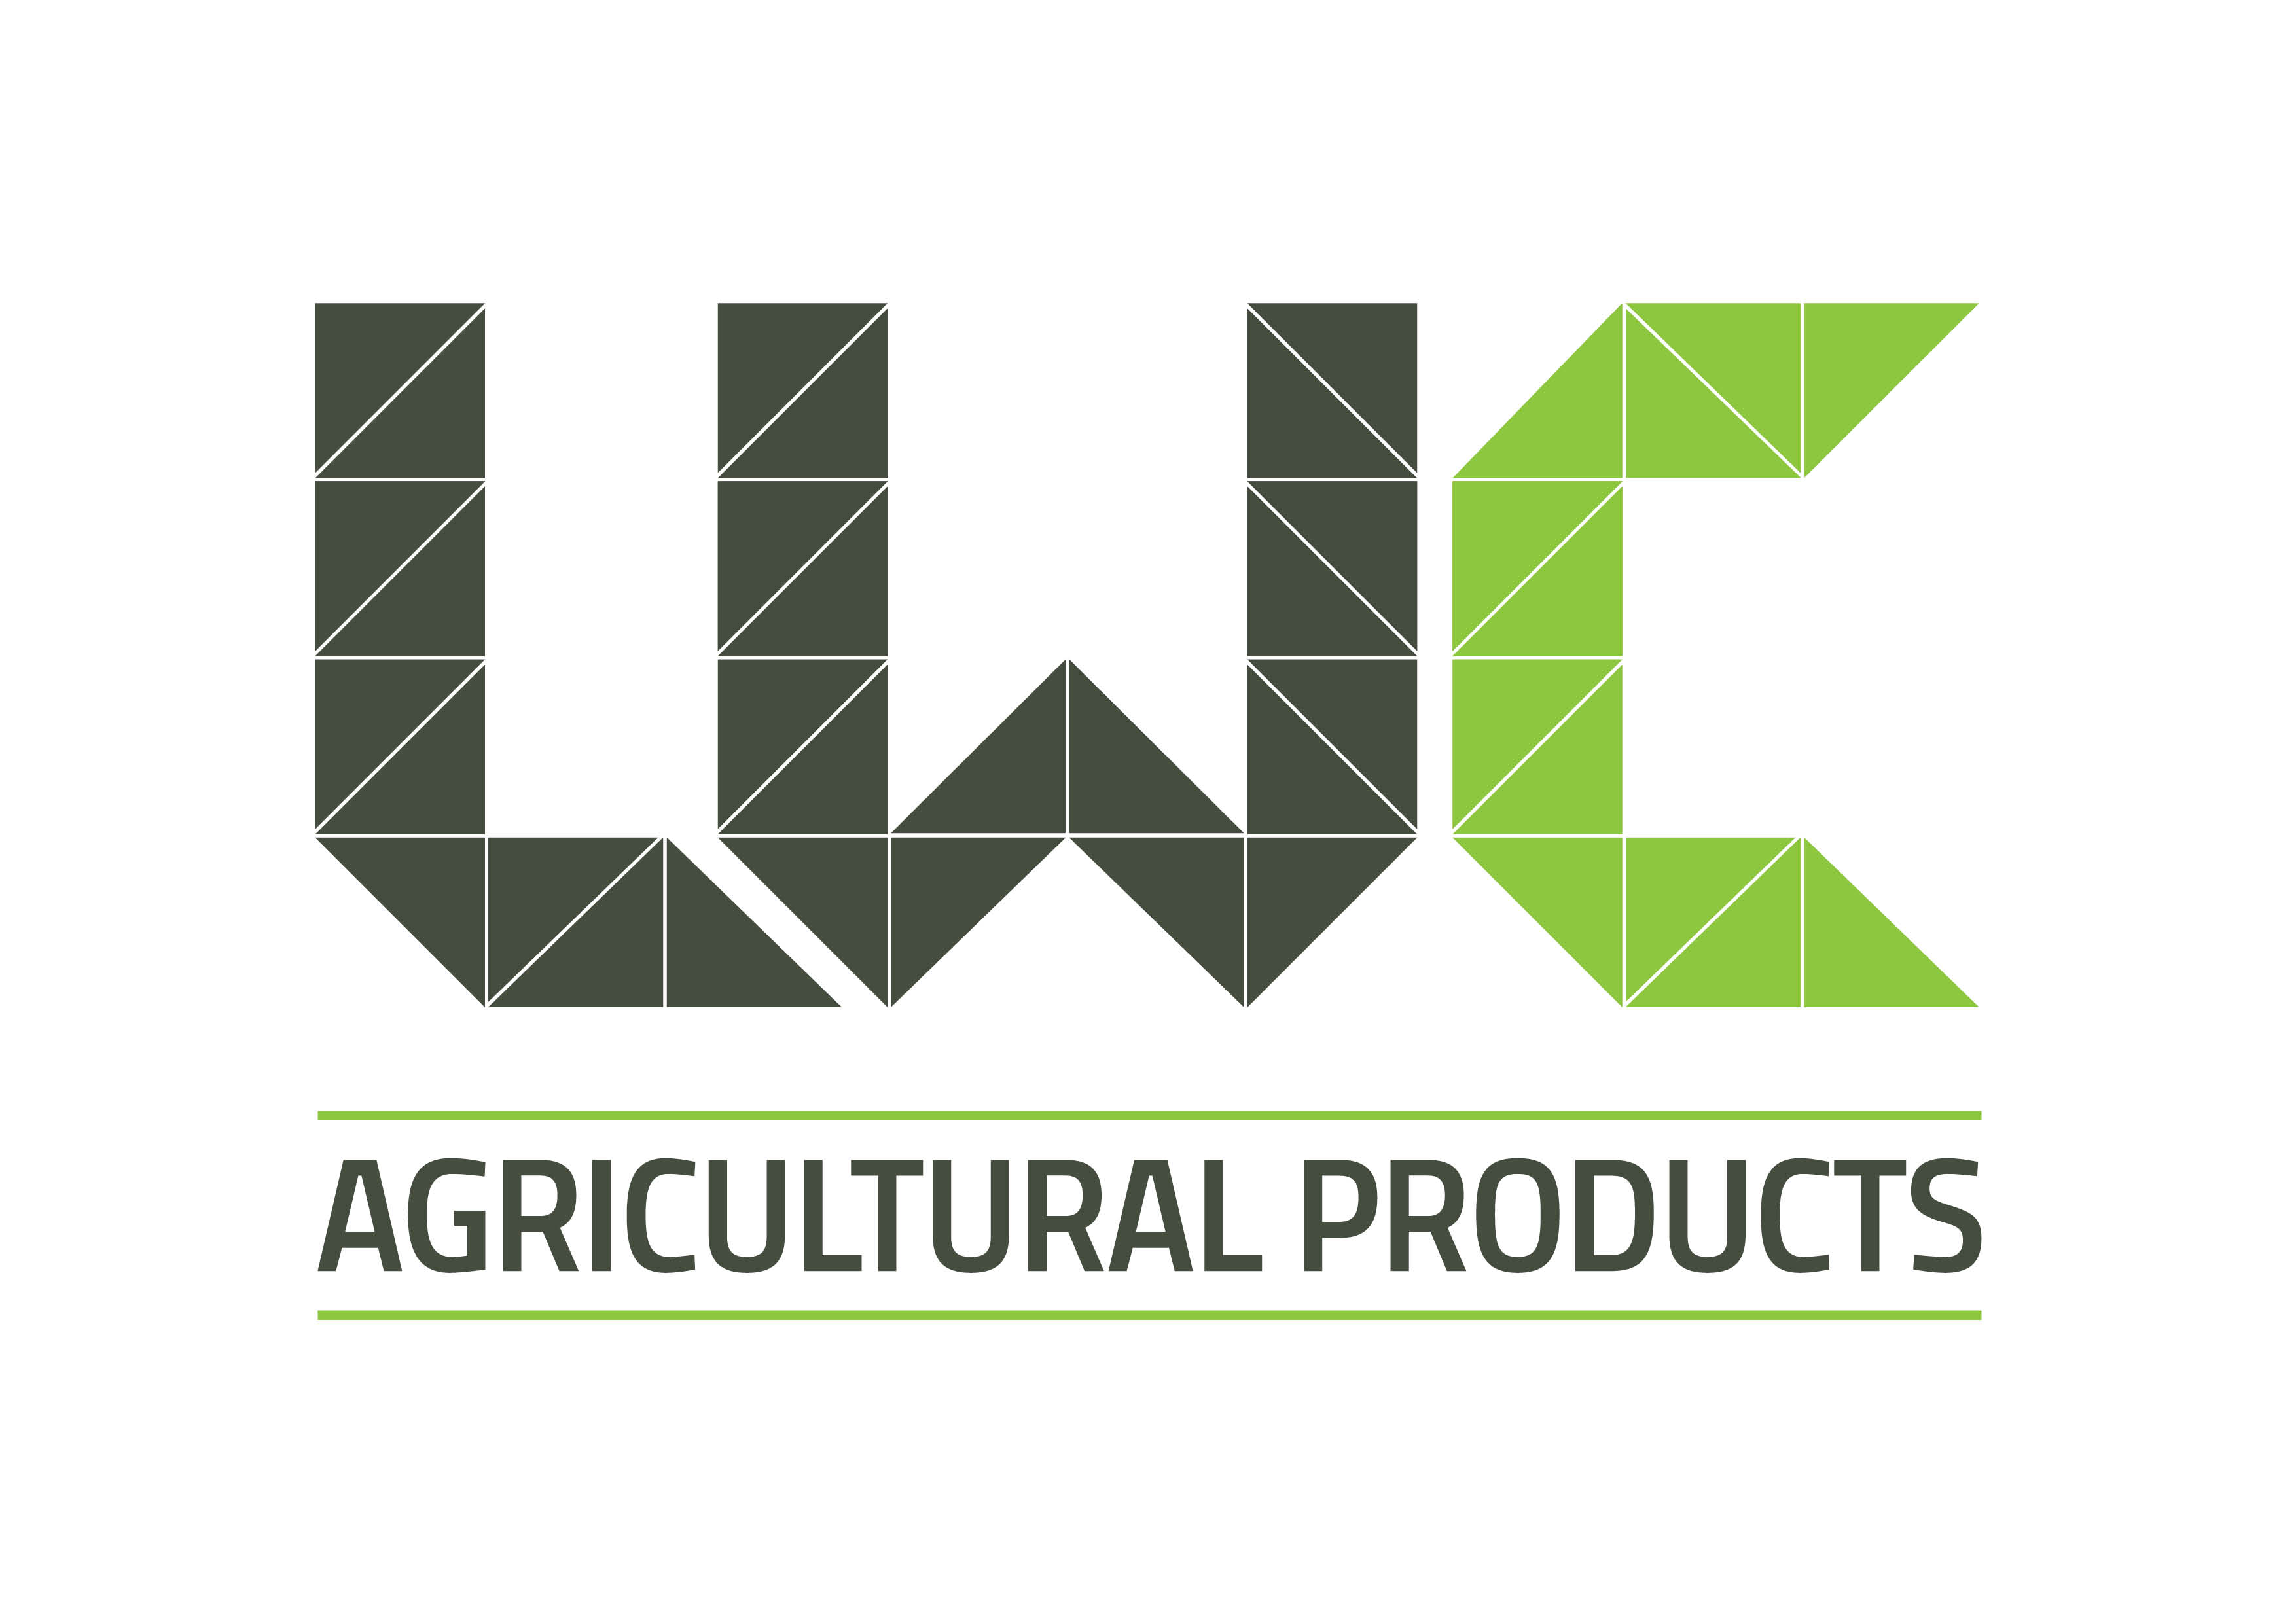 LWC AGRICULTURAL PRODUCTS